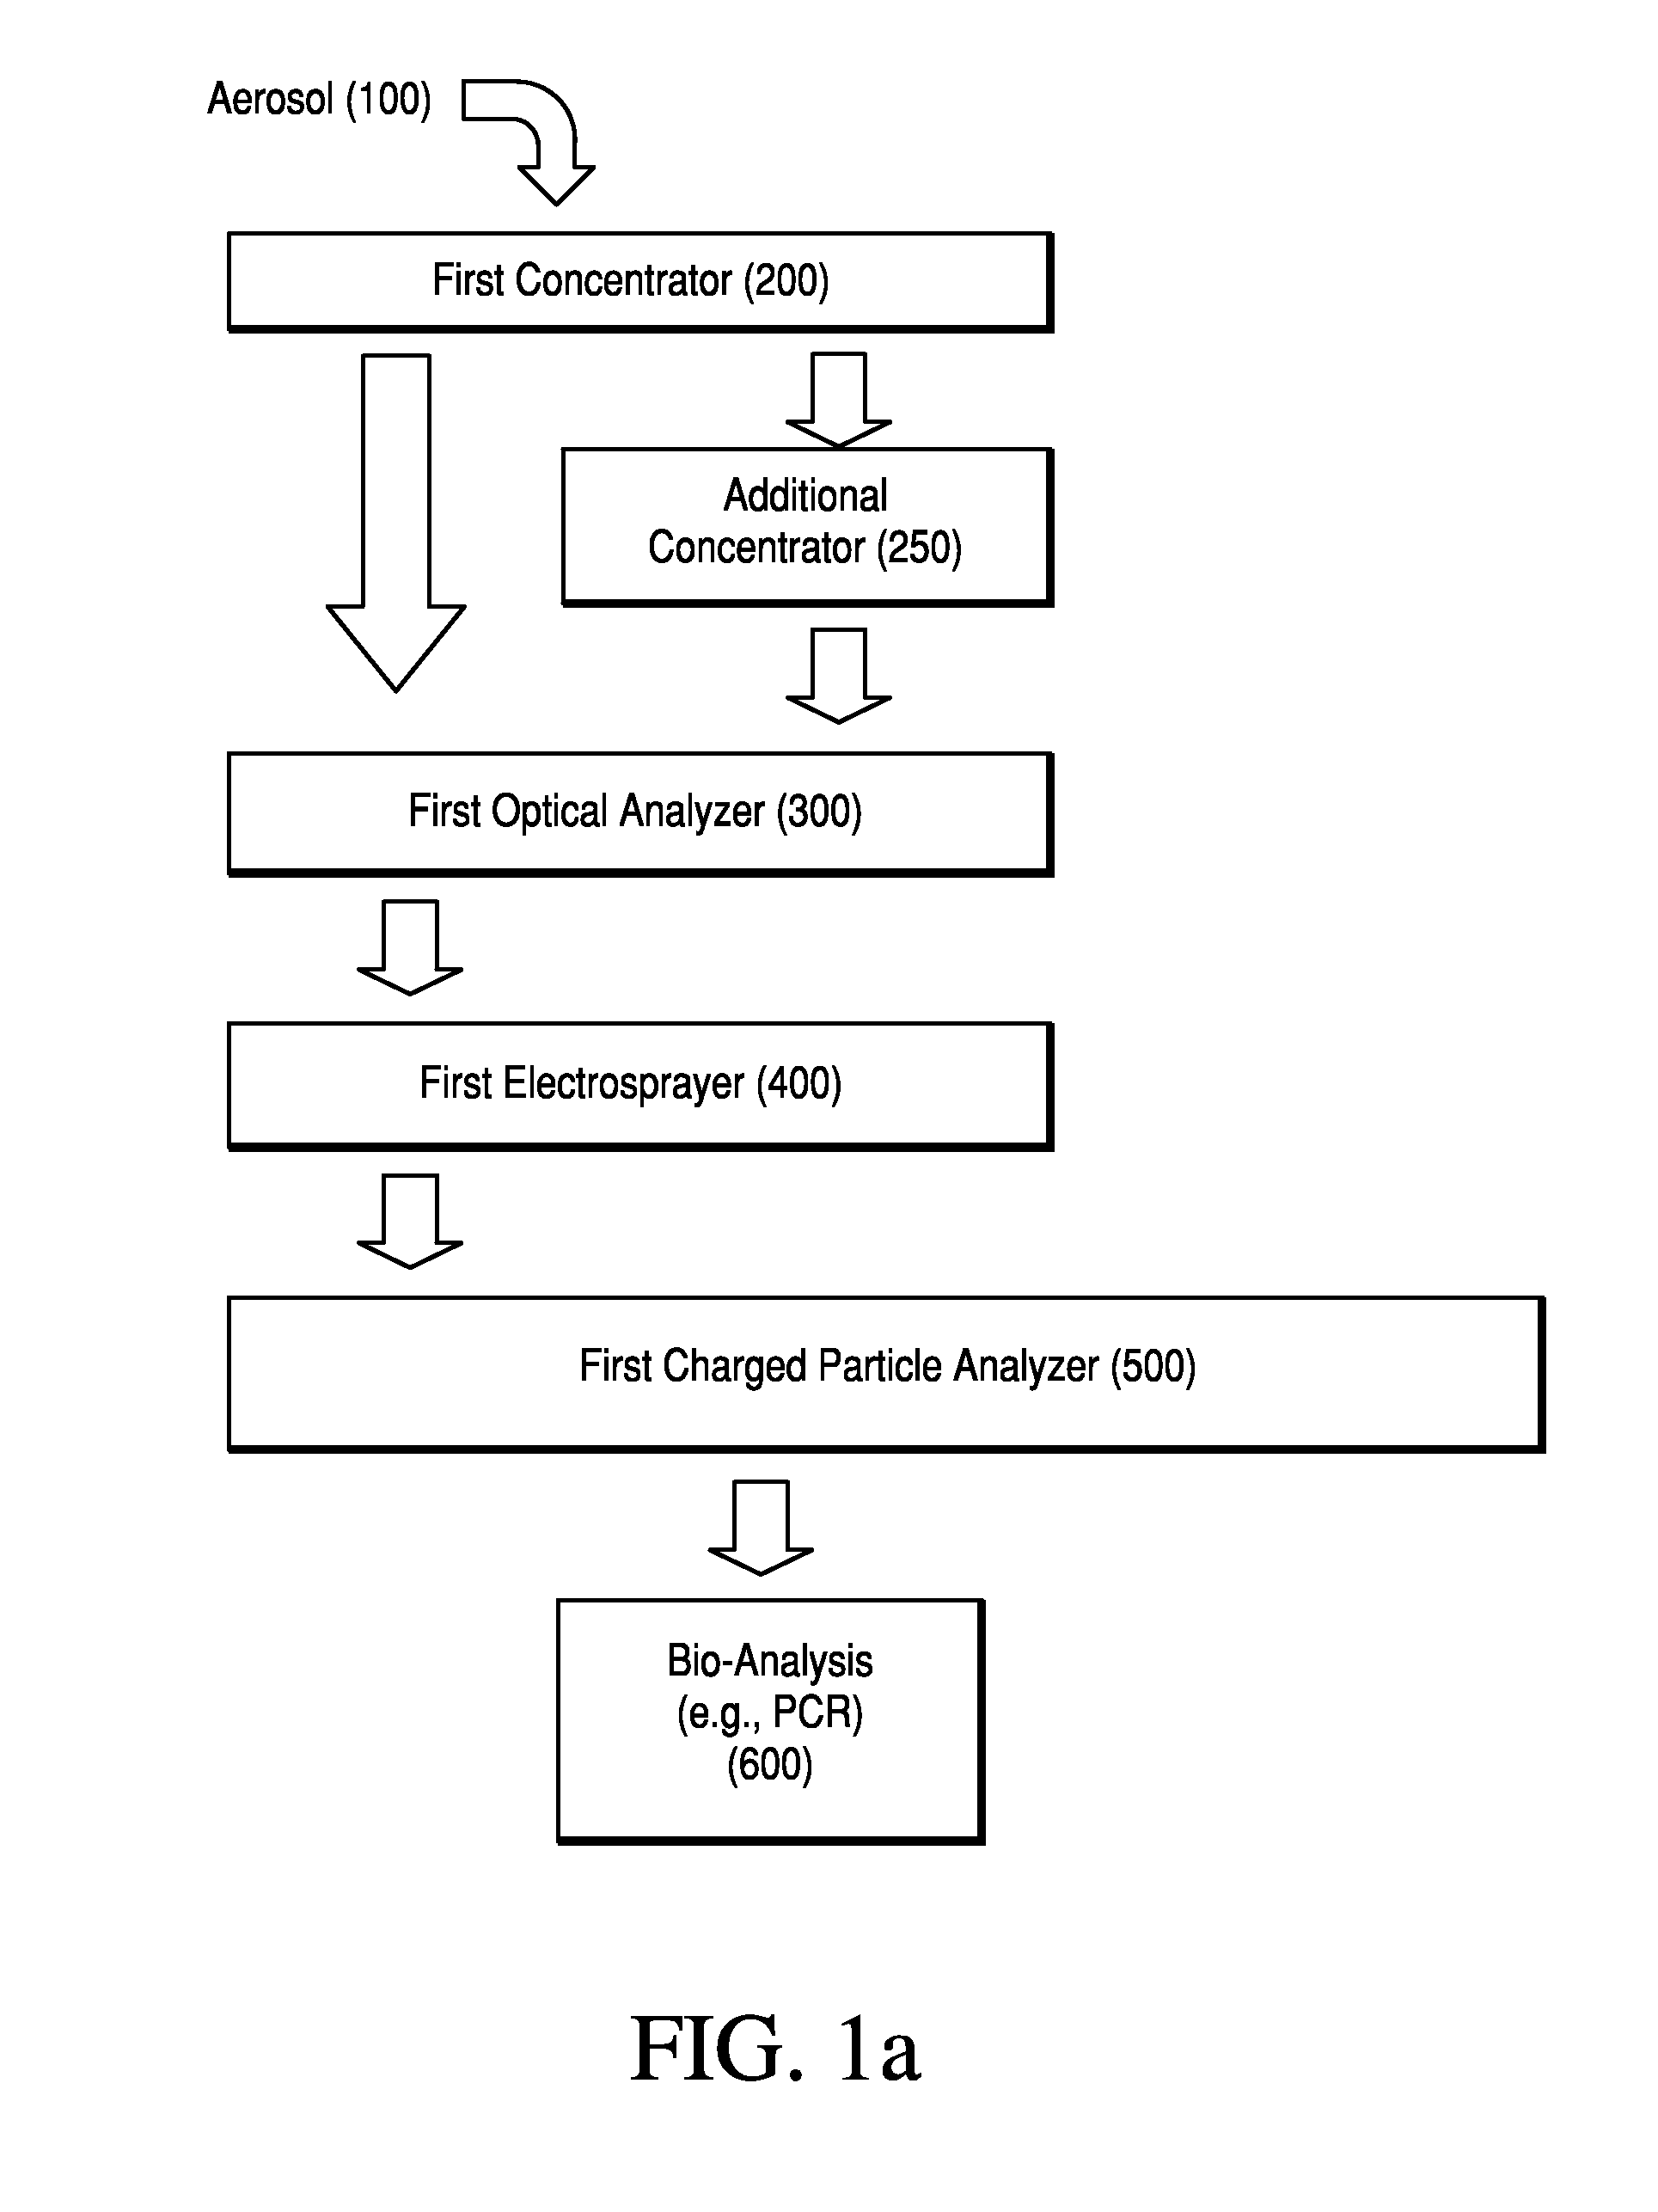 Method and apparatus for sorting and analyzing particles in an aerosol with redundant particle analysis